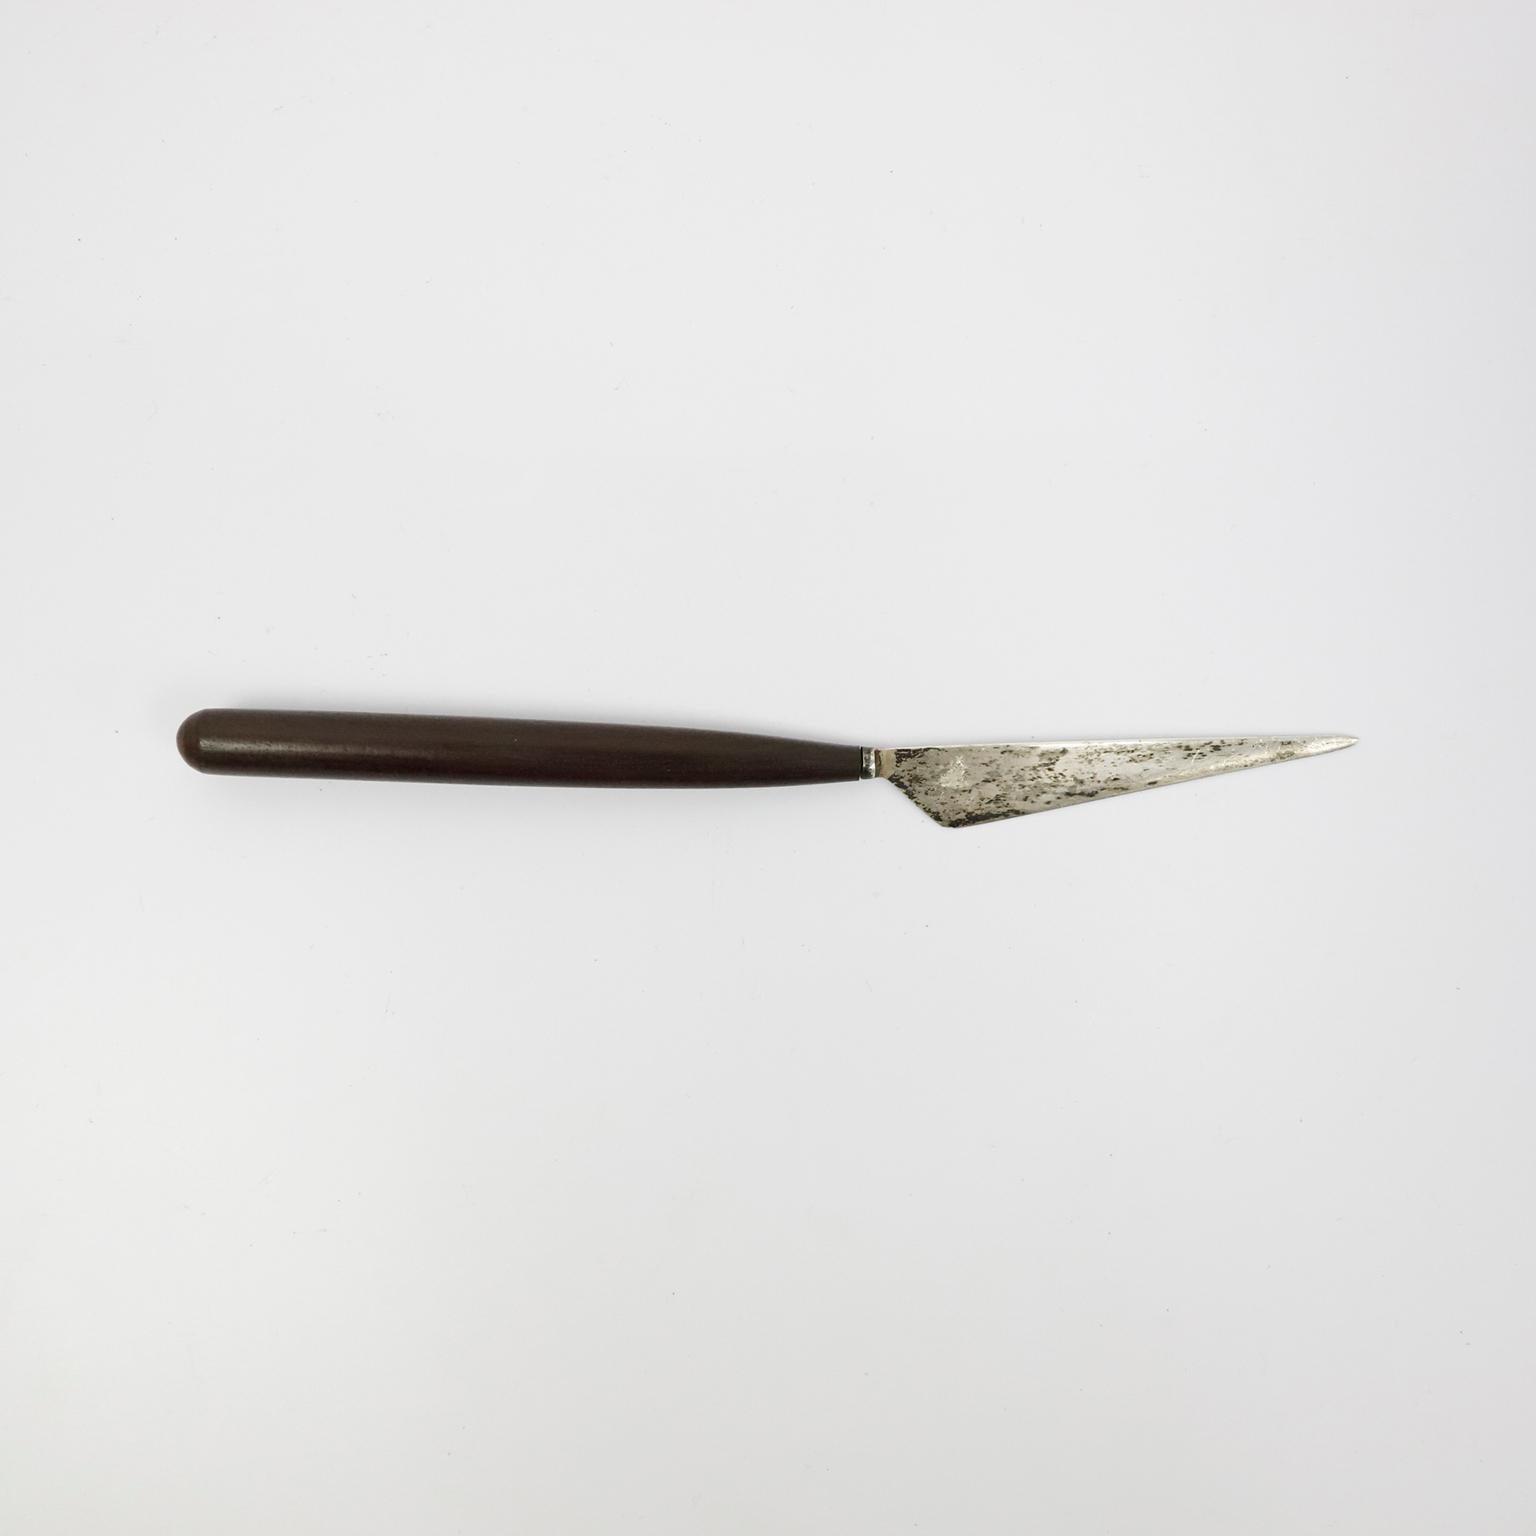 Circa 1940. We offer this rare William Spratling Sterling and Ebony Wood Letter Opener. fantastic Patina and includes original Spratling Brand.